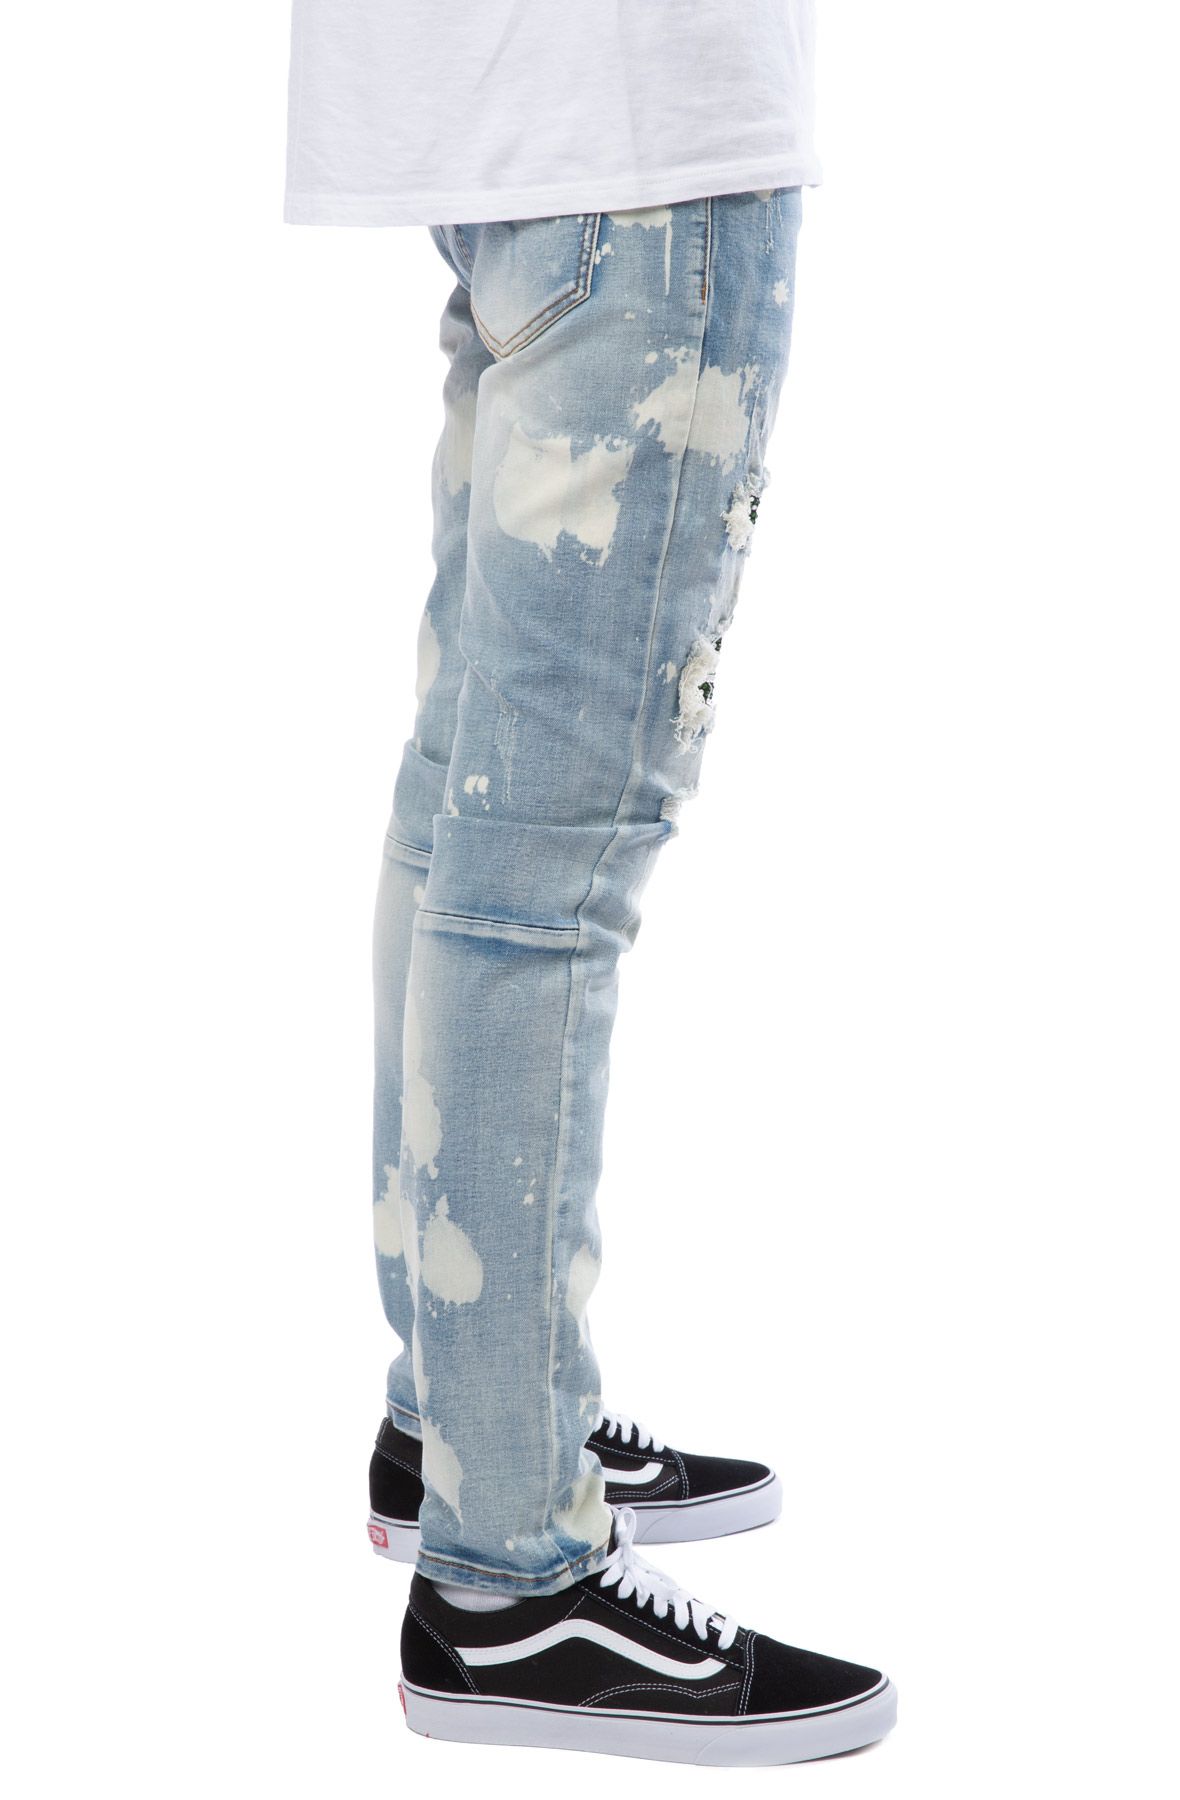 KDNK Rescue Ripped Jeans KND4355-BLUE - Shiekh